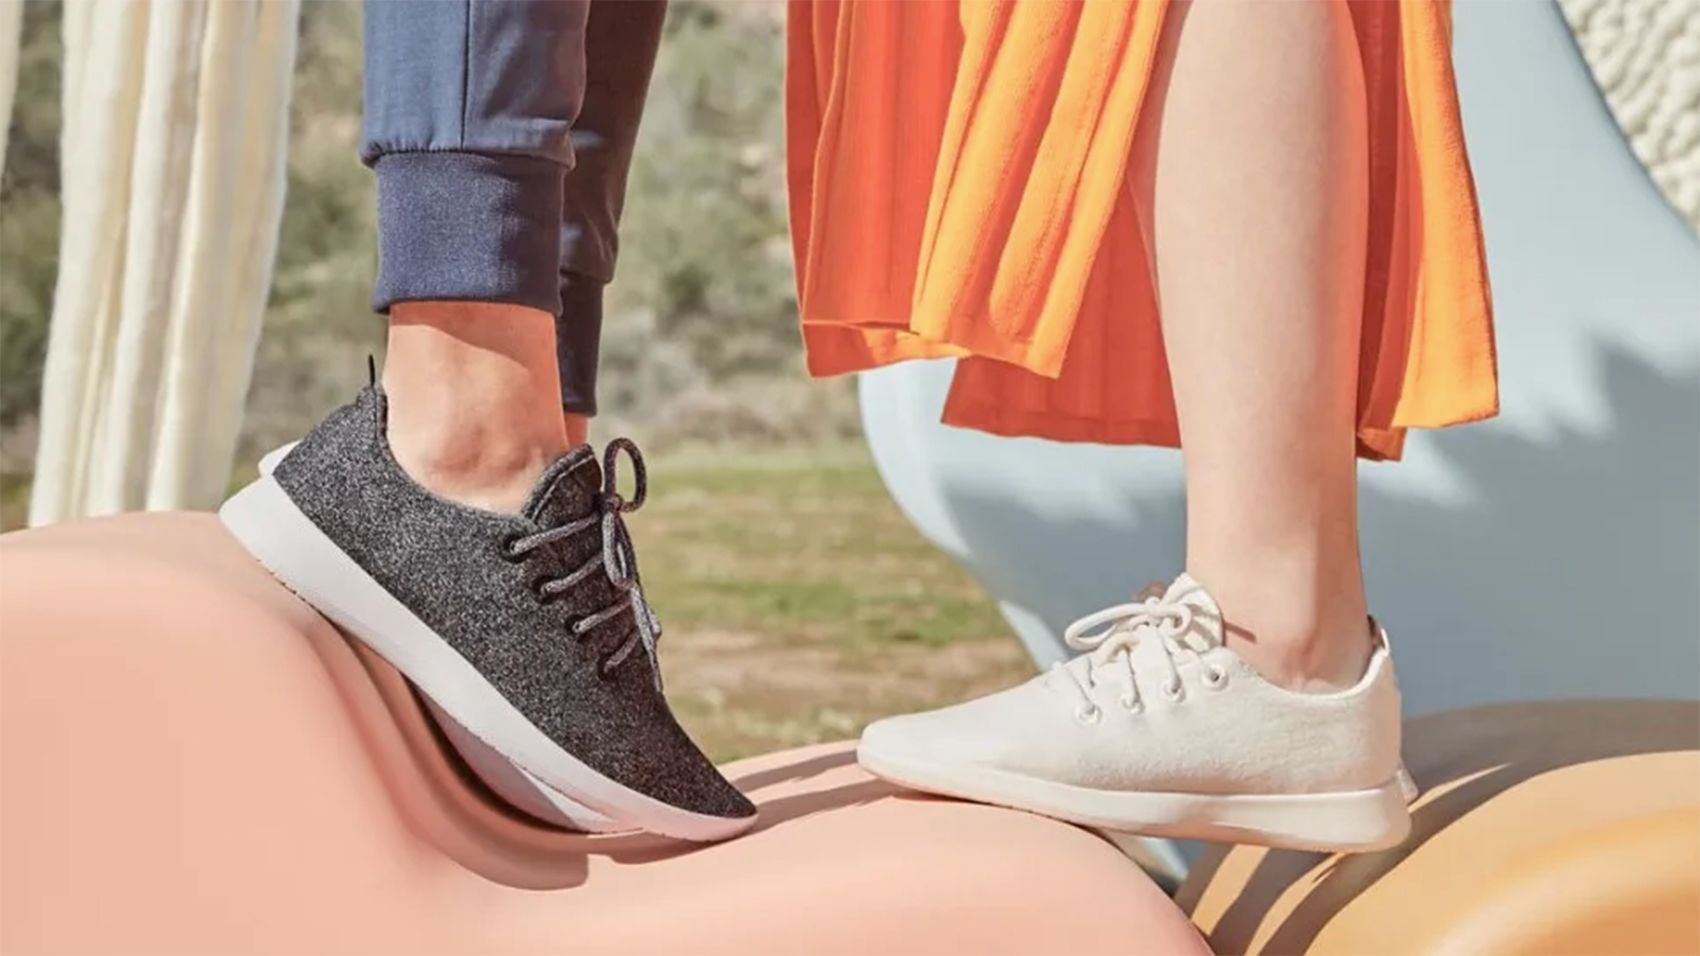 Allbirds review Shoes tested for comfort and style | CNN